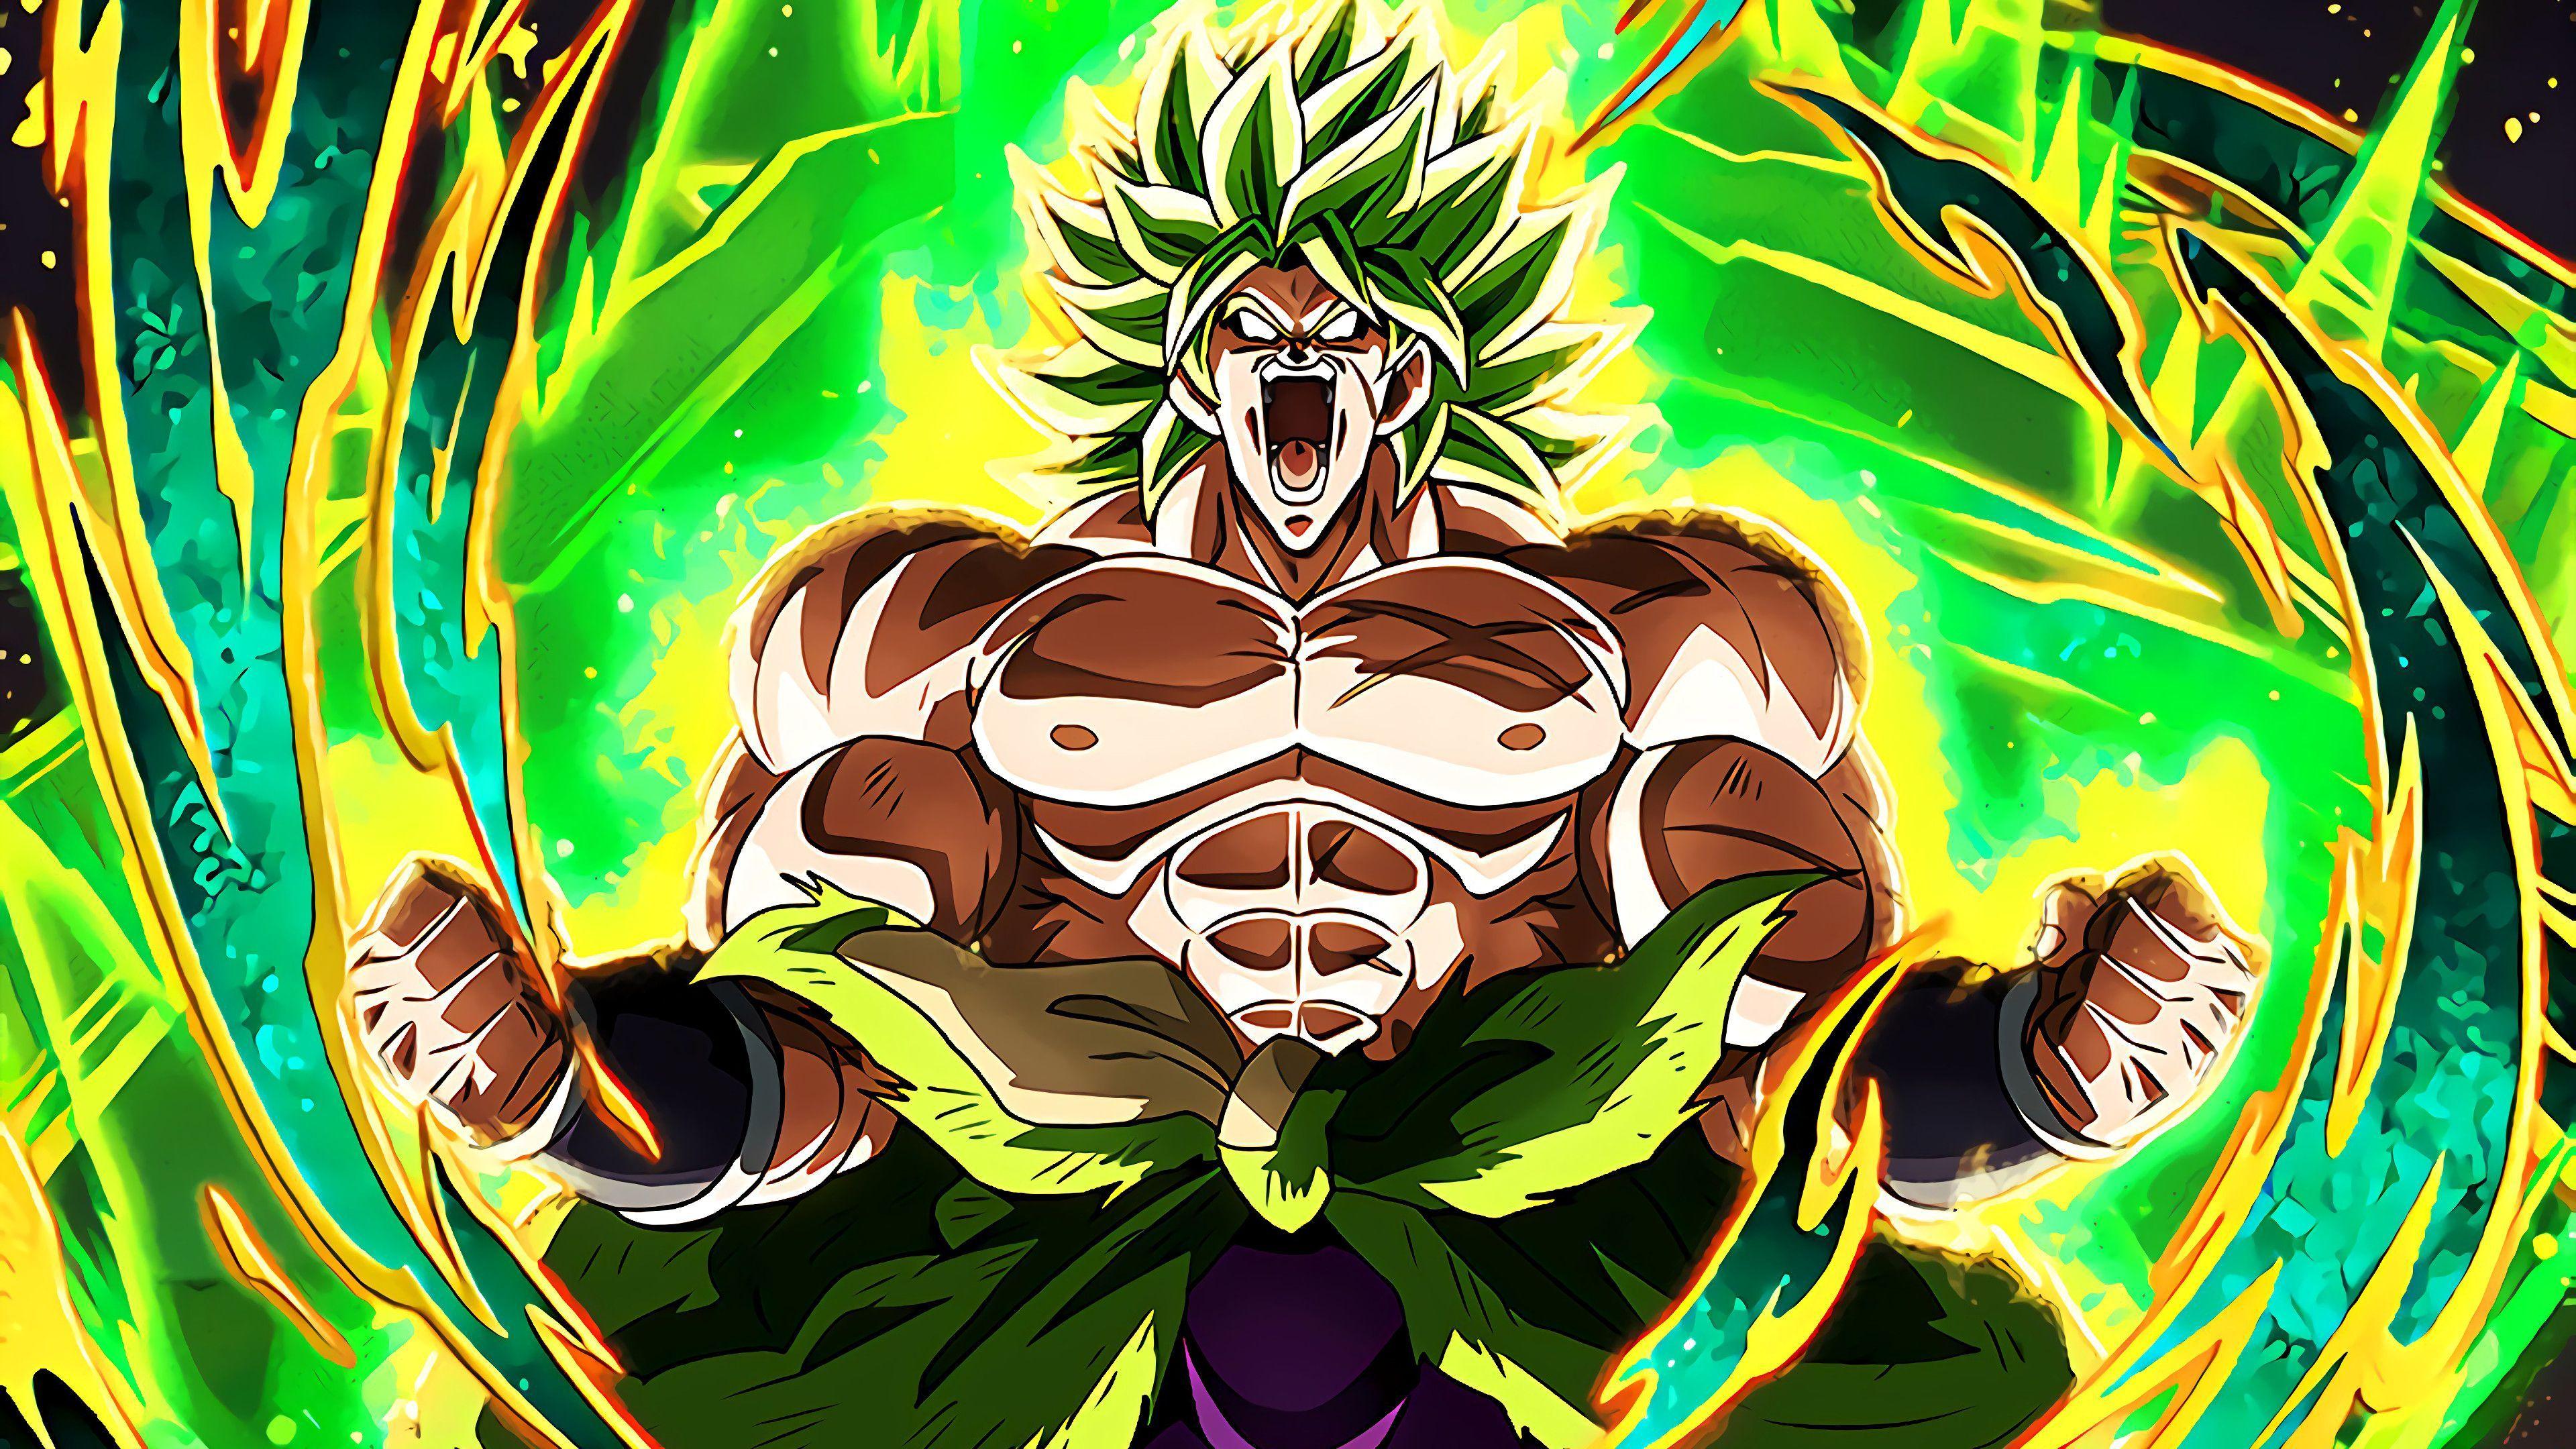 Tried my Hand at Making a DBS Broly Wallpaper Hope you guys like it and  let me know what you think 1920x1080  rDragonballLegends